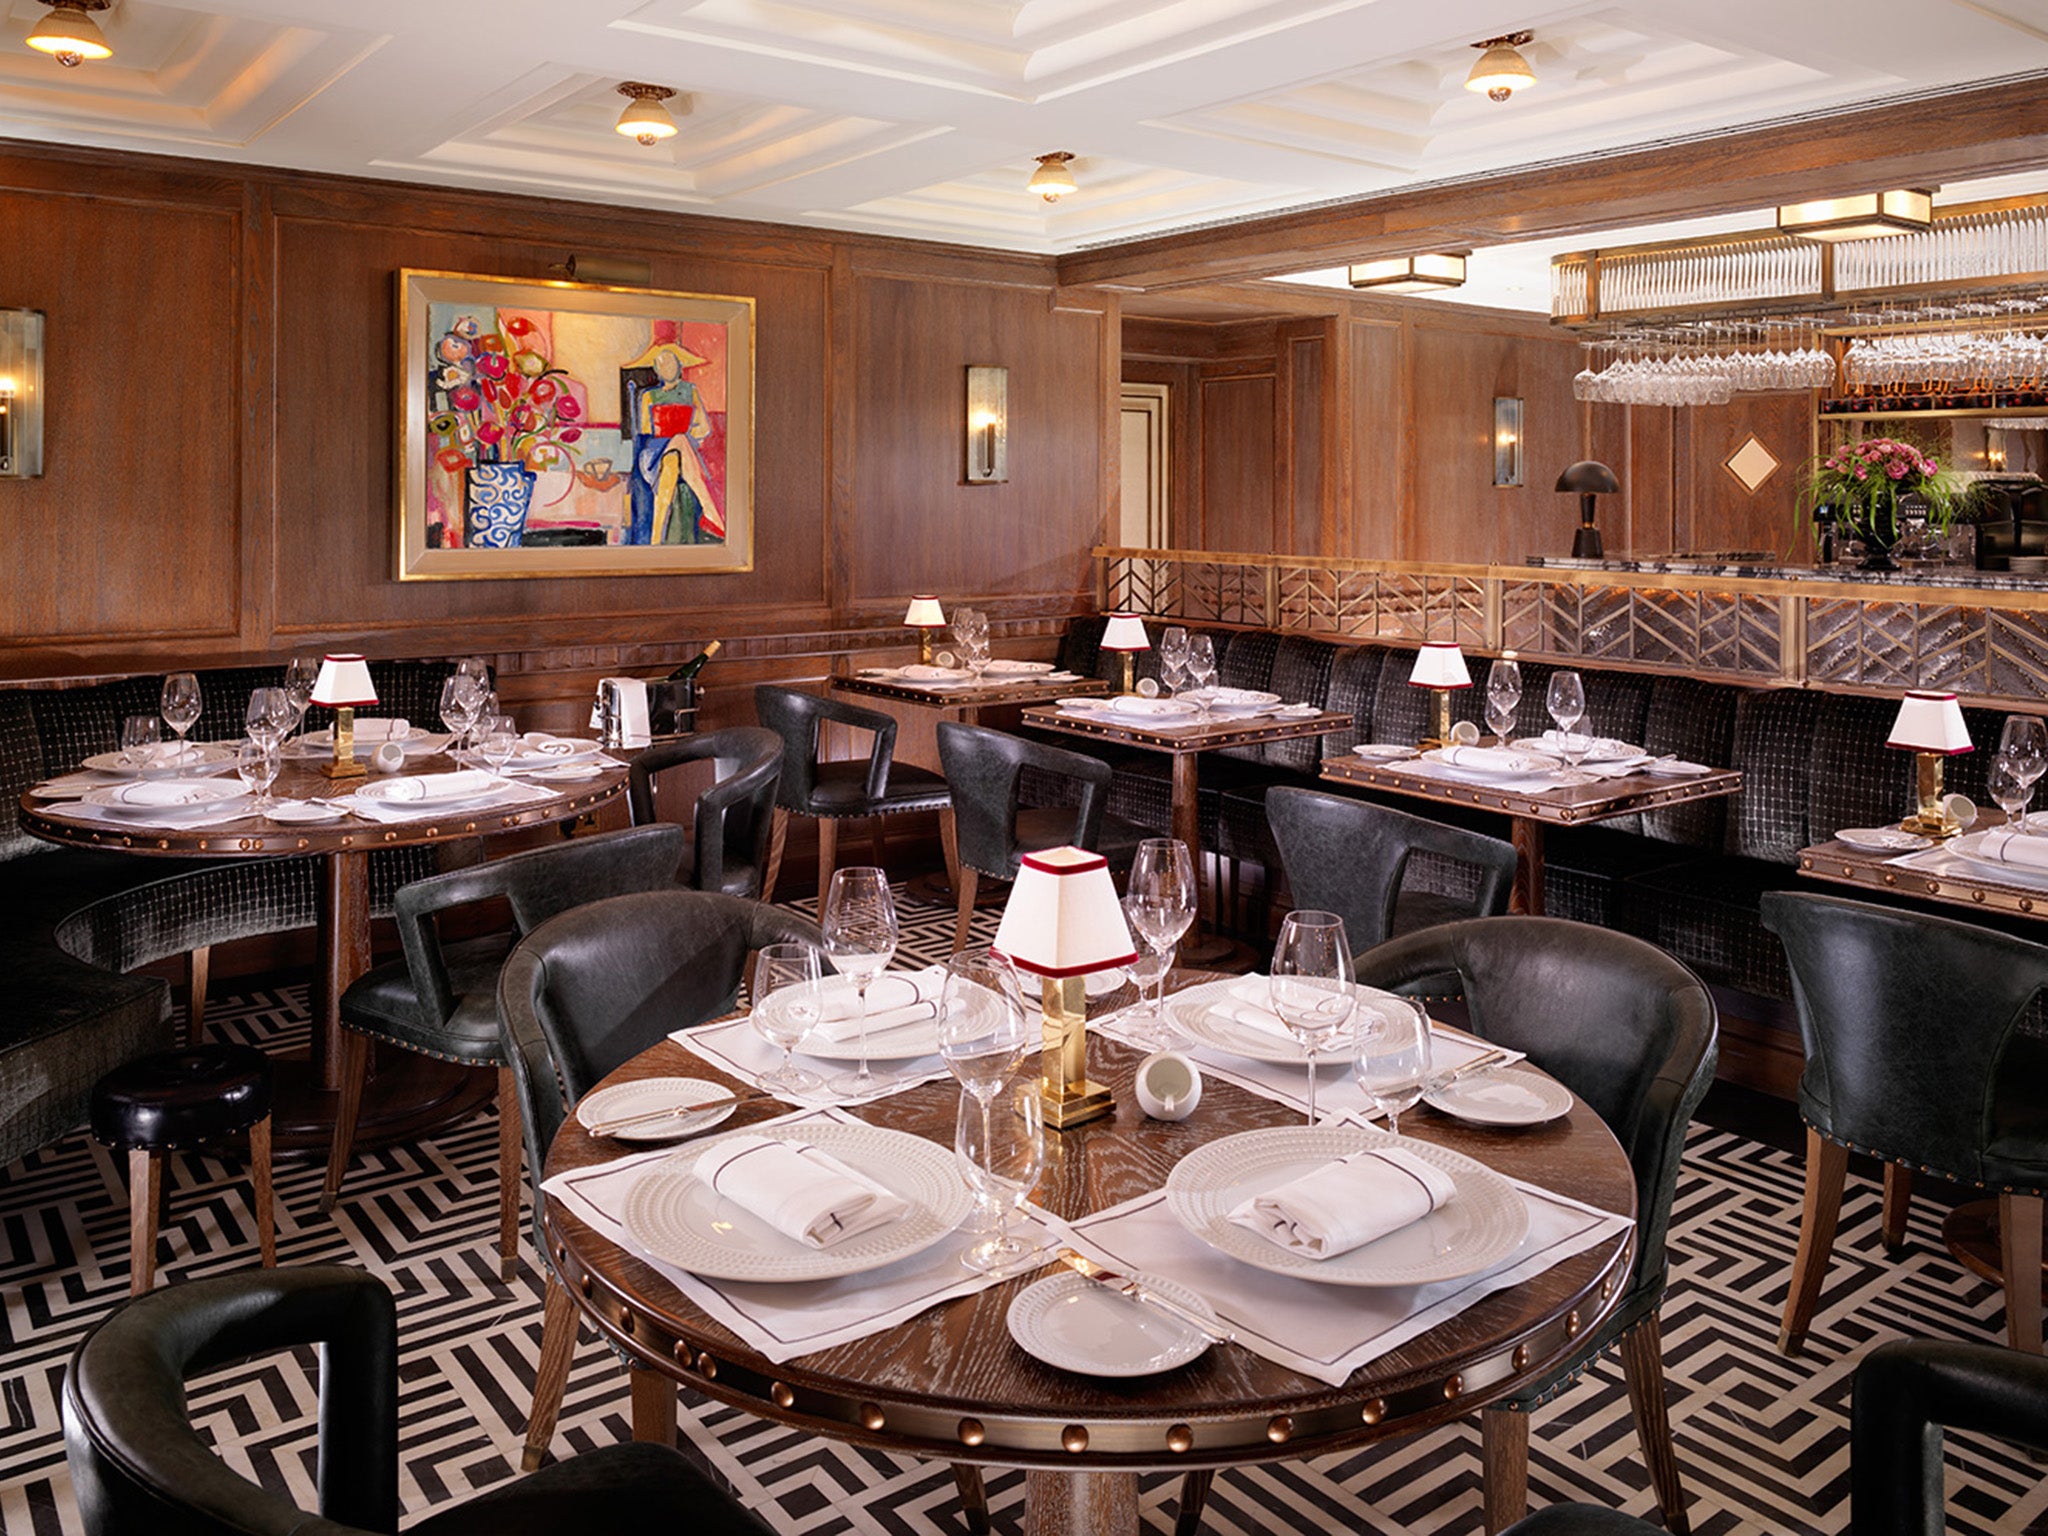 Decked out in 1920s glamour, the Ormer Mayfair is the perfect place for a traditional British meal